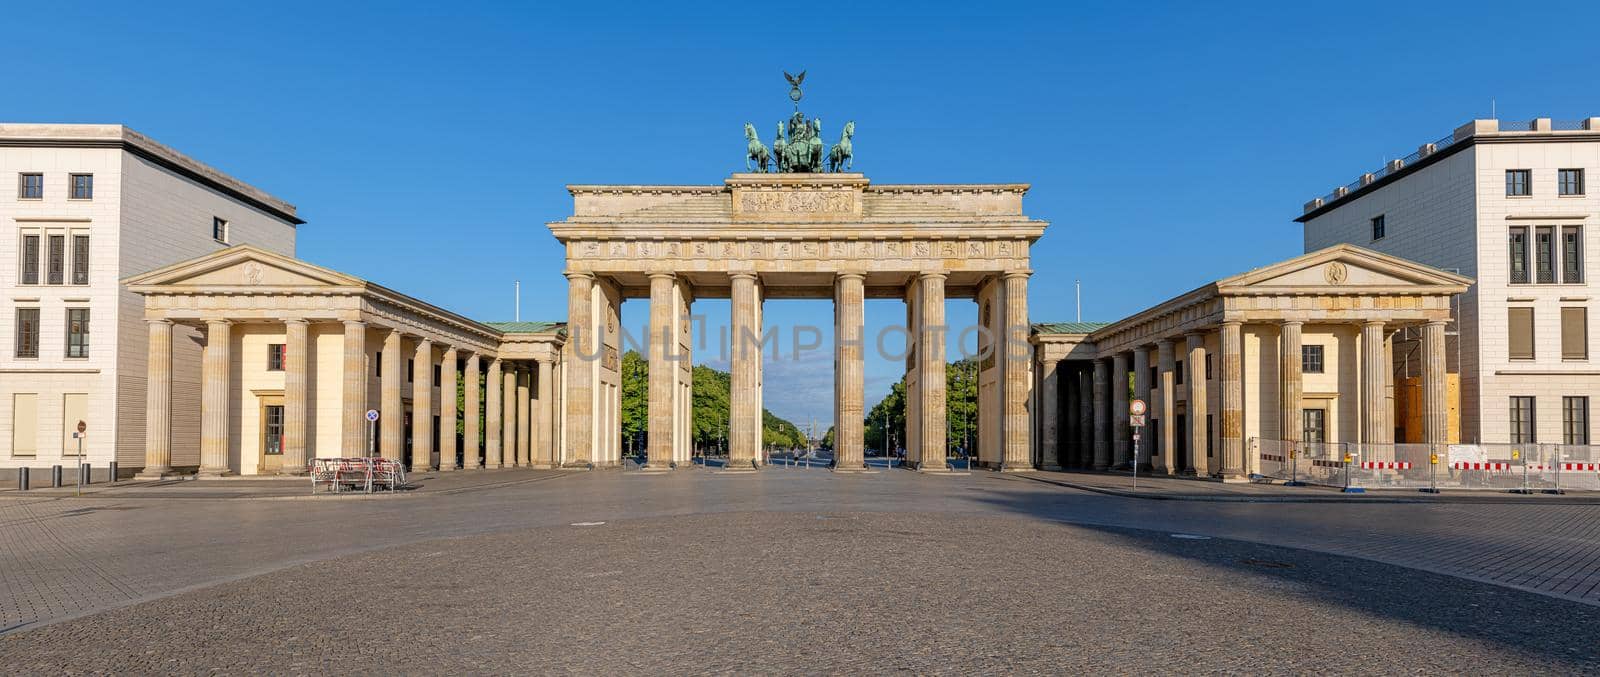 Panorama of the famous Brandenburg Gate in Berlin by elxeneize